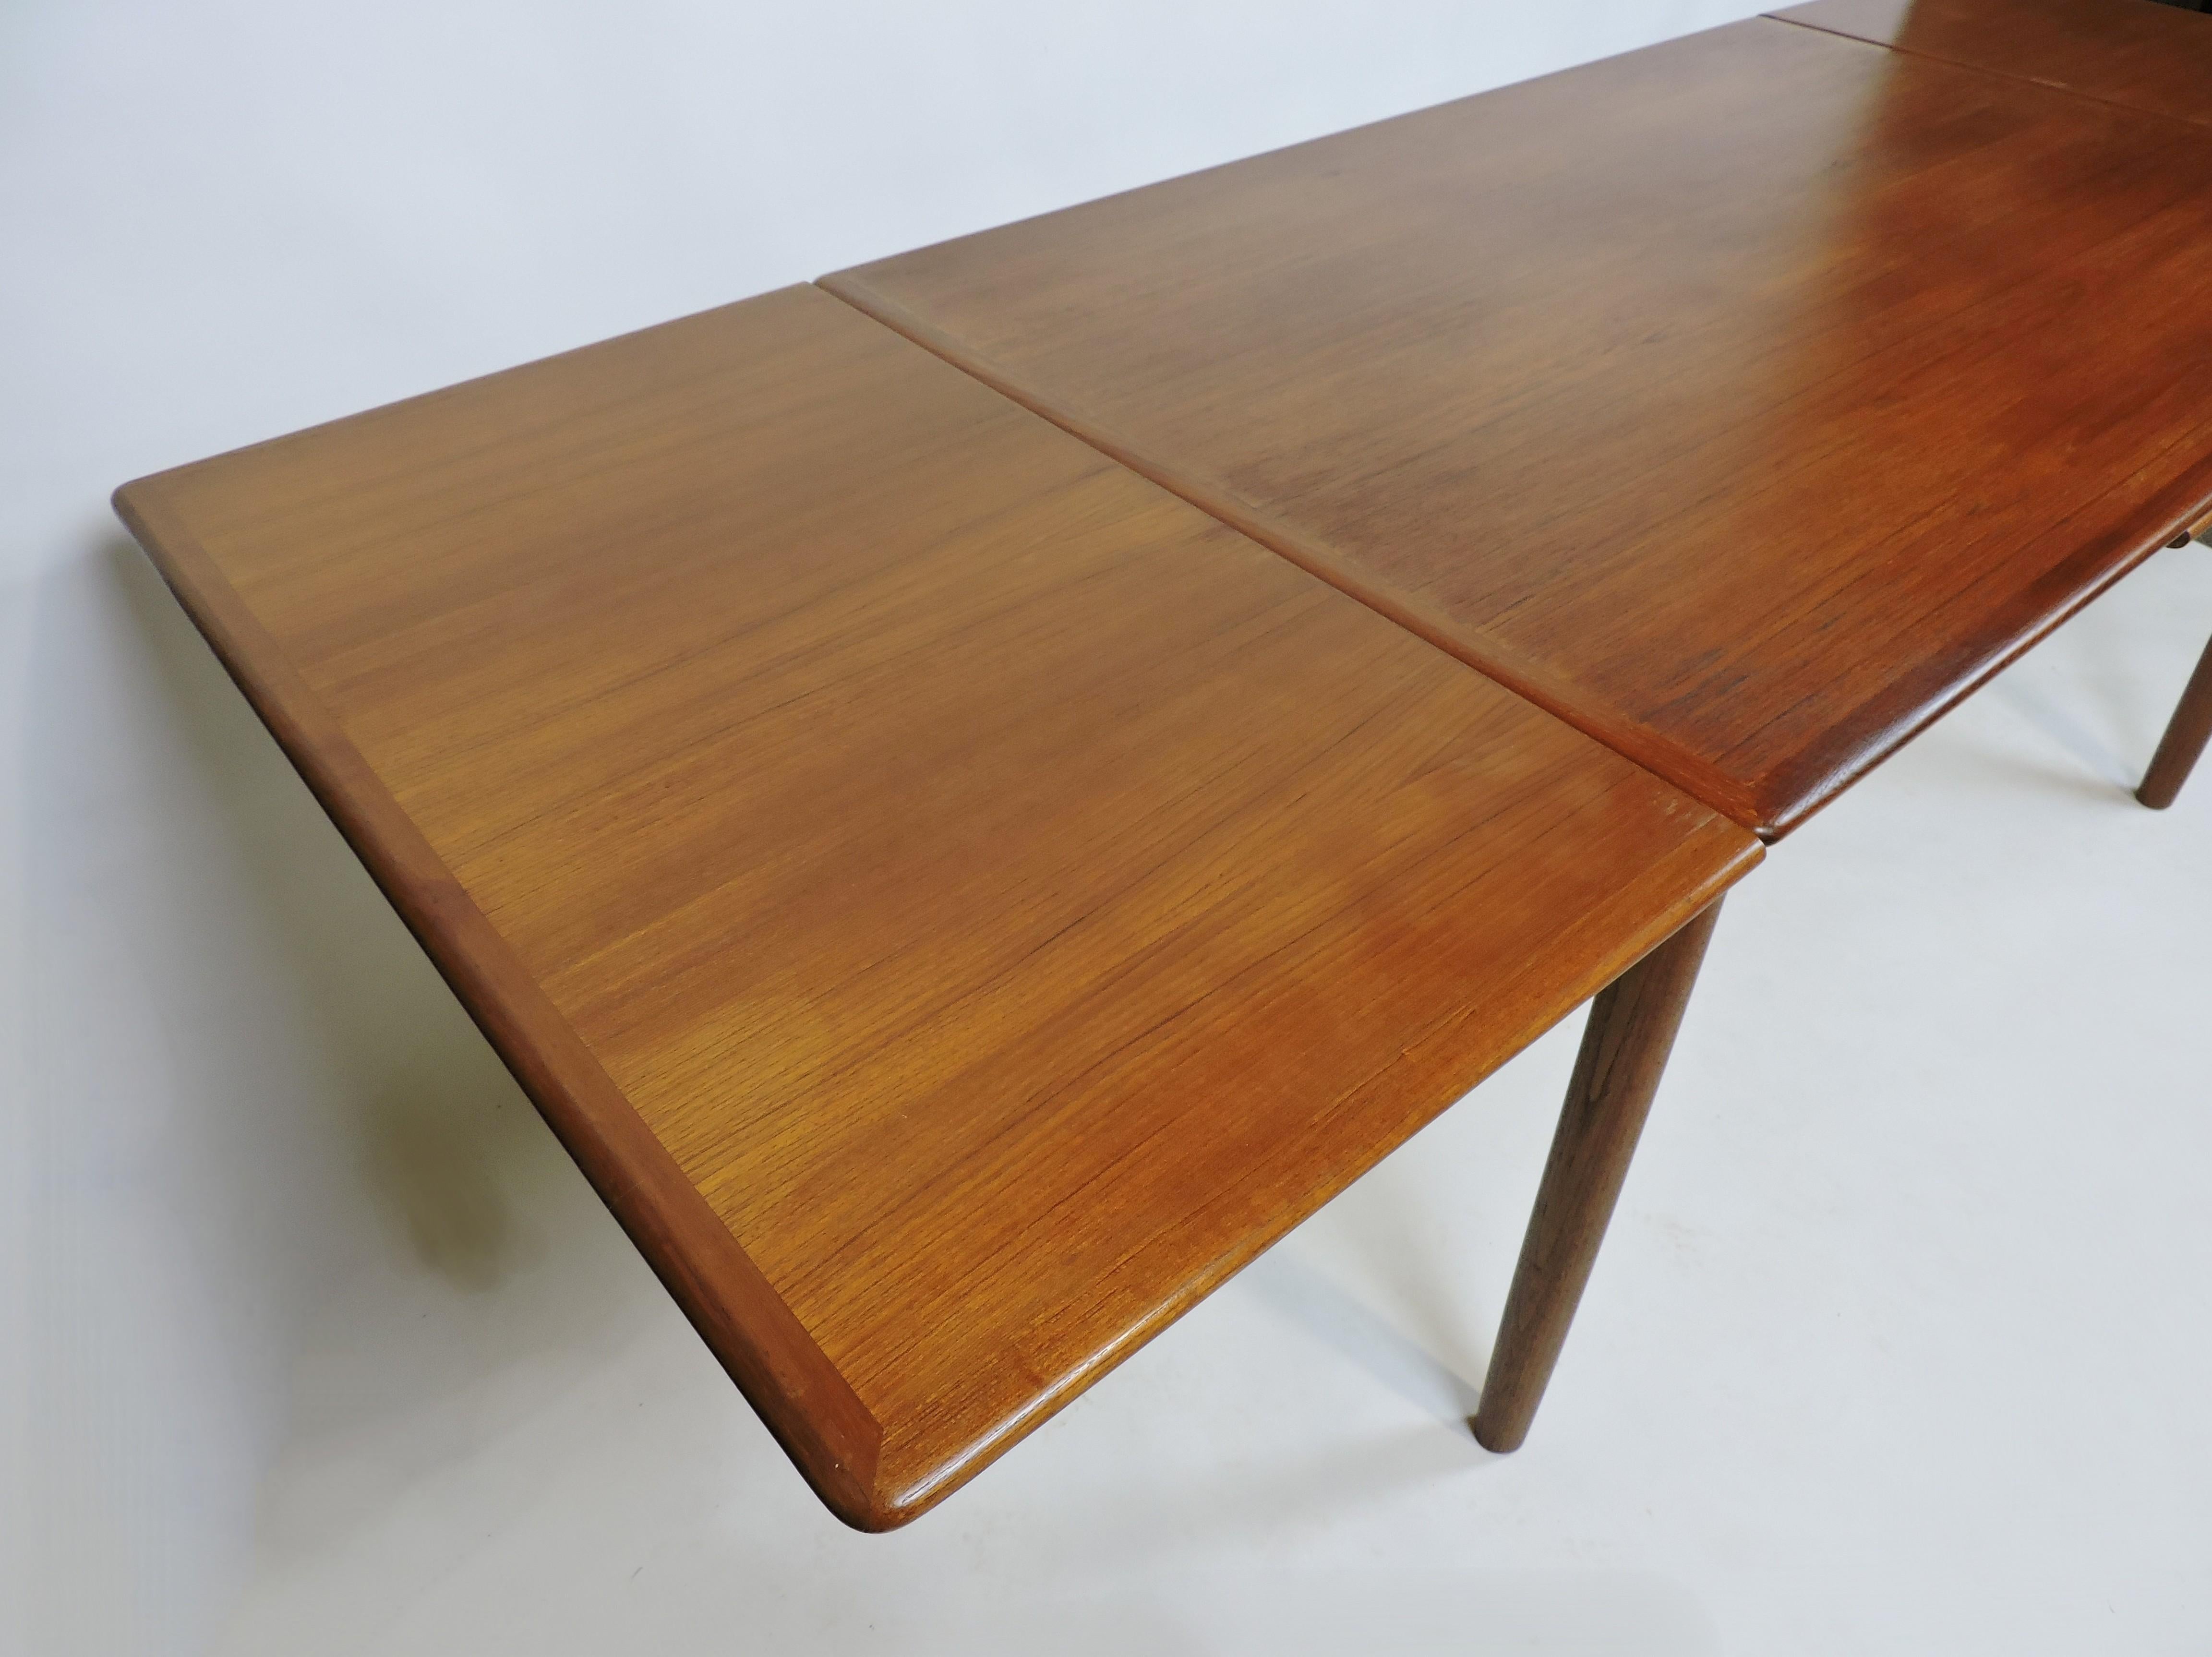 Mid-20th Century Large Danish Modern Teak Extendable Dining Table with Self-Storing Leaves